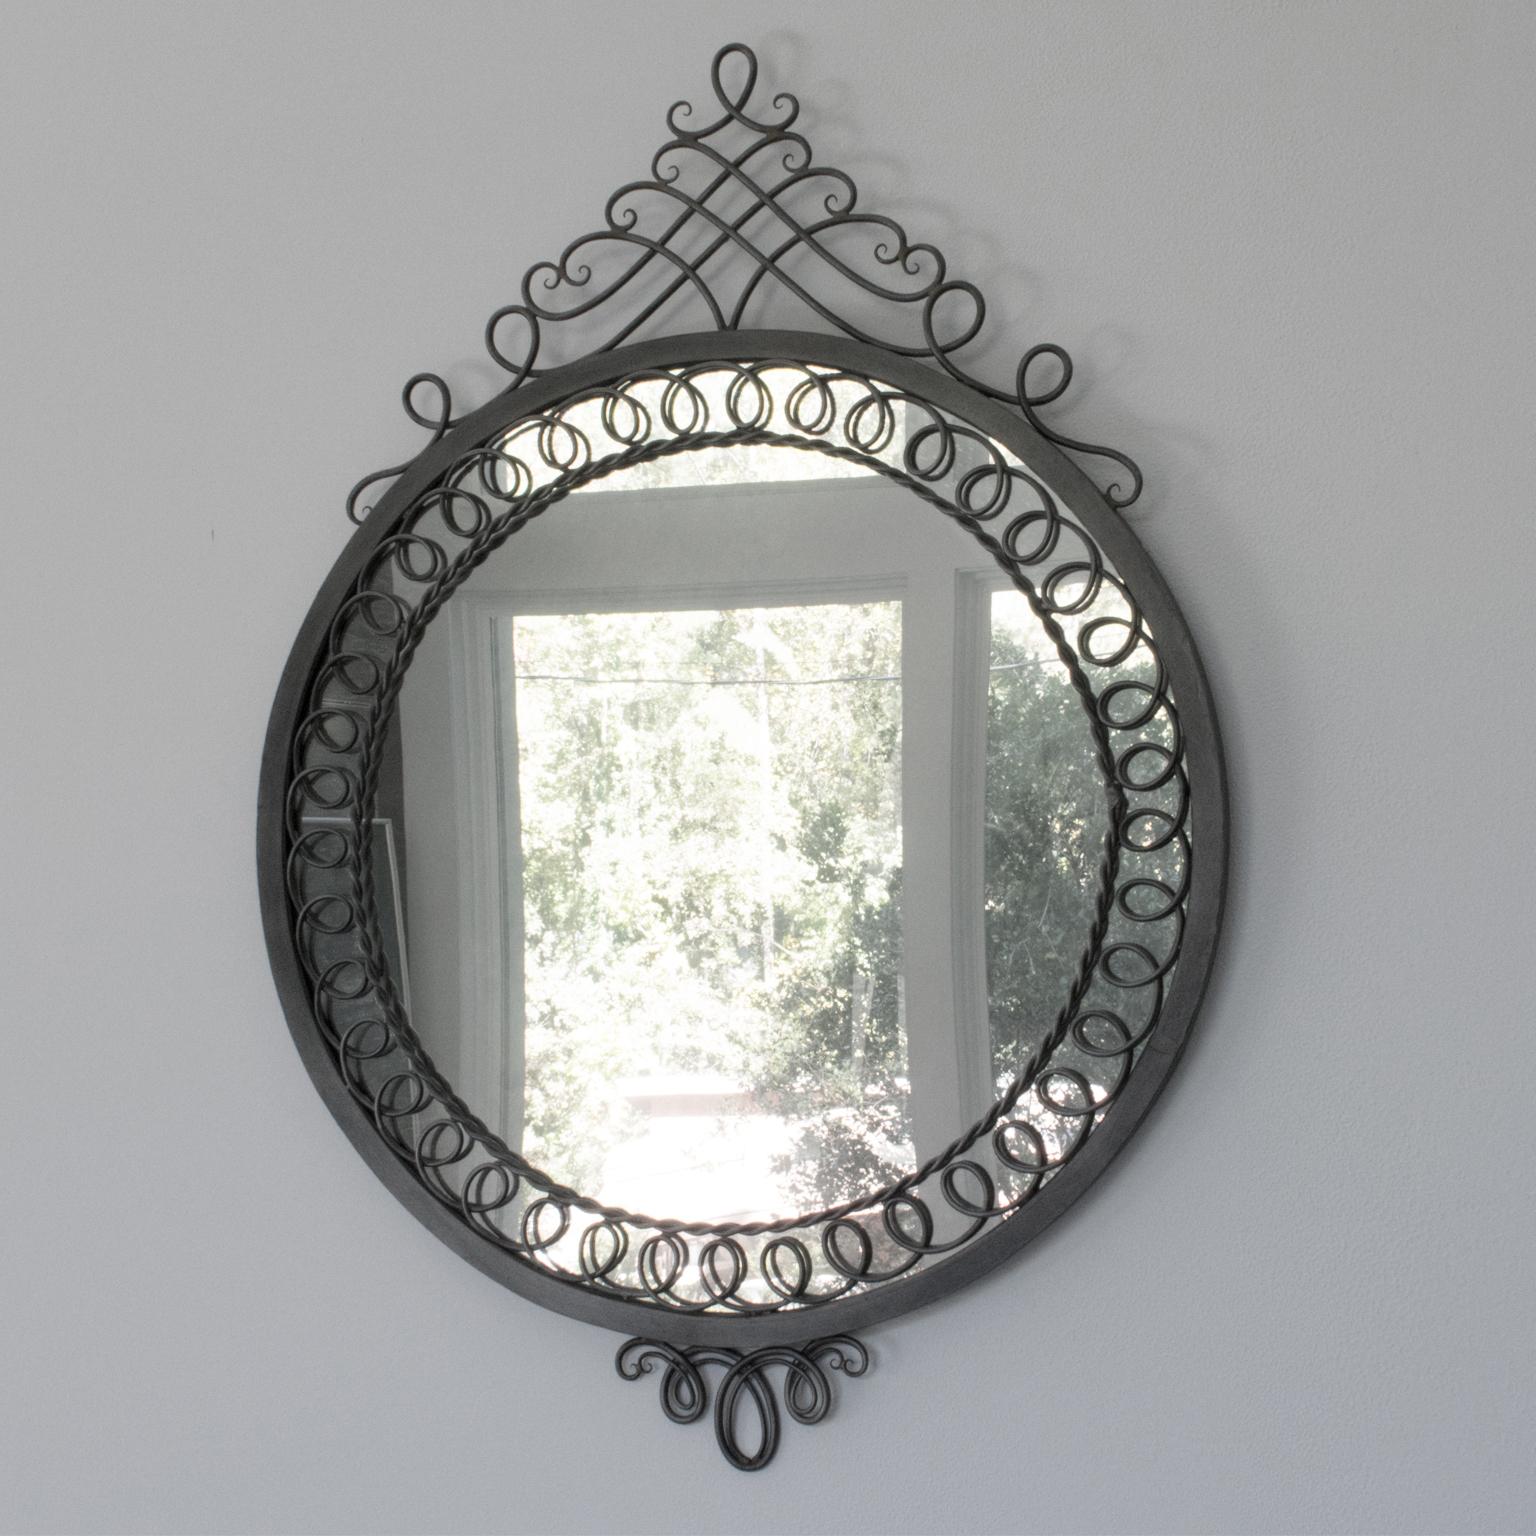 This striking French 1950s Mid-Century neoclassic cast iron wall mirror is a timeless piece of home decor. Its impressive rounded shape is surrounded by ornately detailed metal framing, finished with a beautiful original gunmetal patina. The lack of